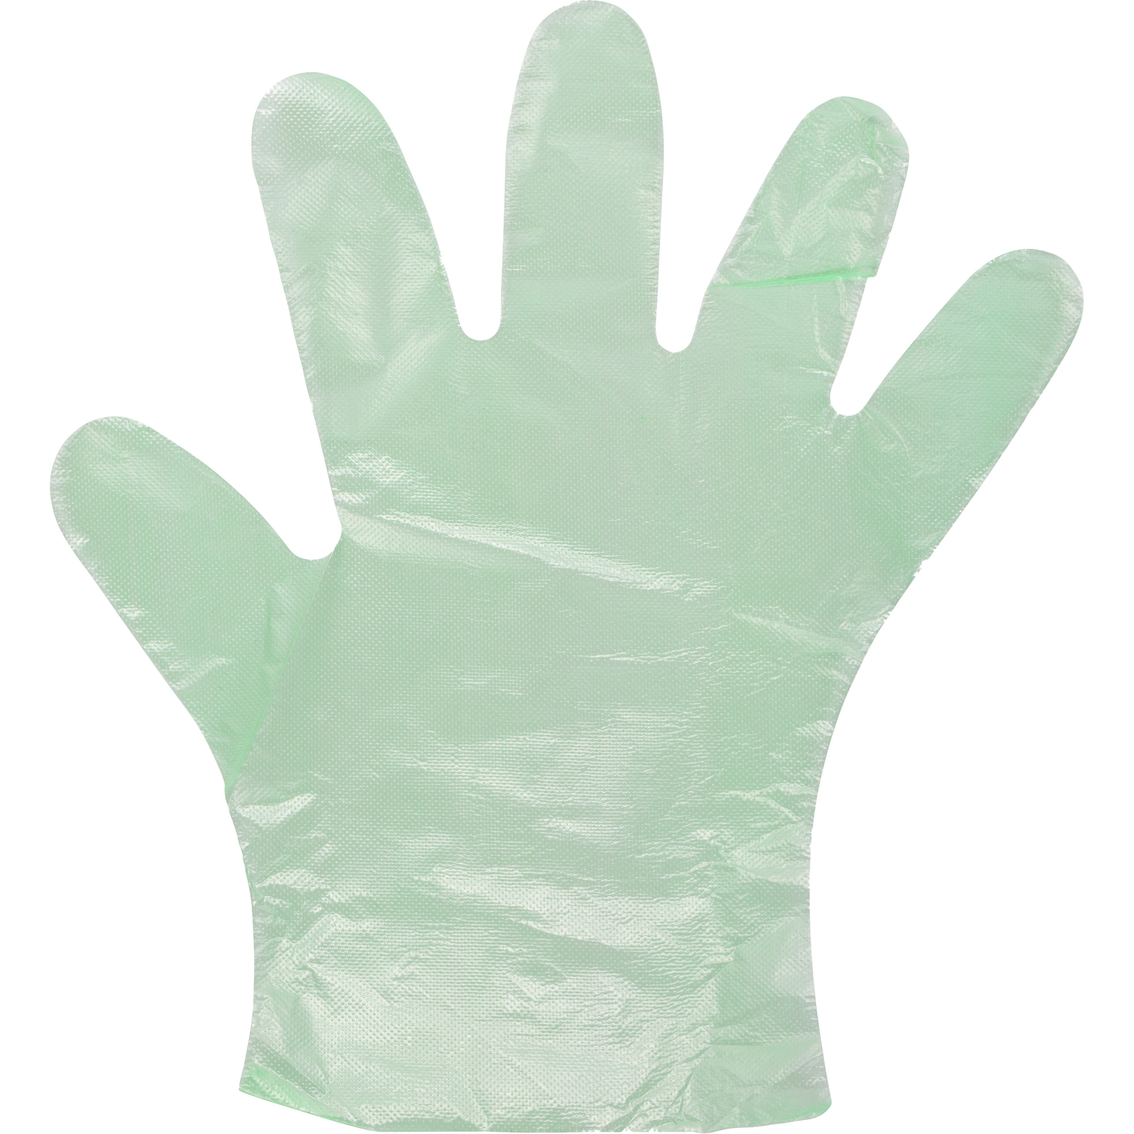 Camco RV Sanitation Disposable Gloves, 100 ct. - Image 4 of 4